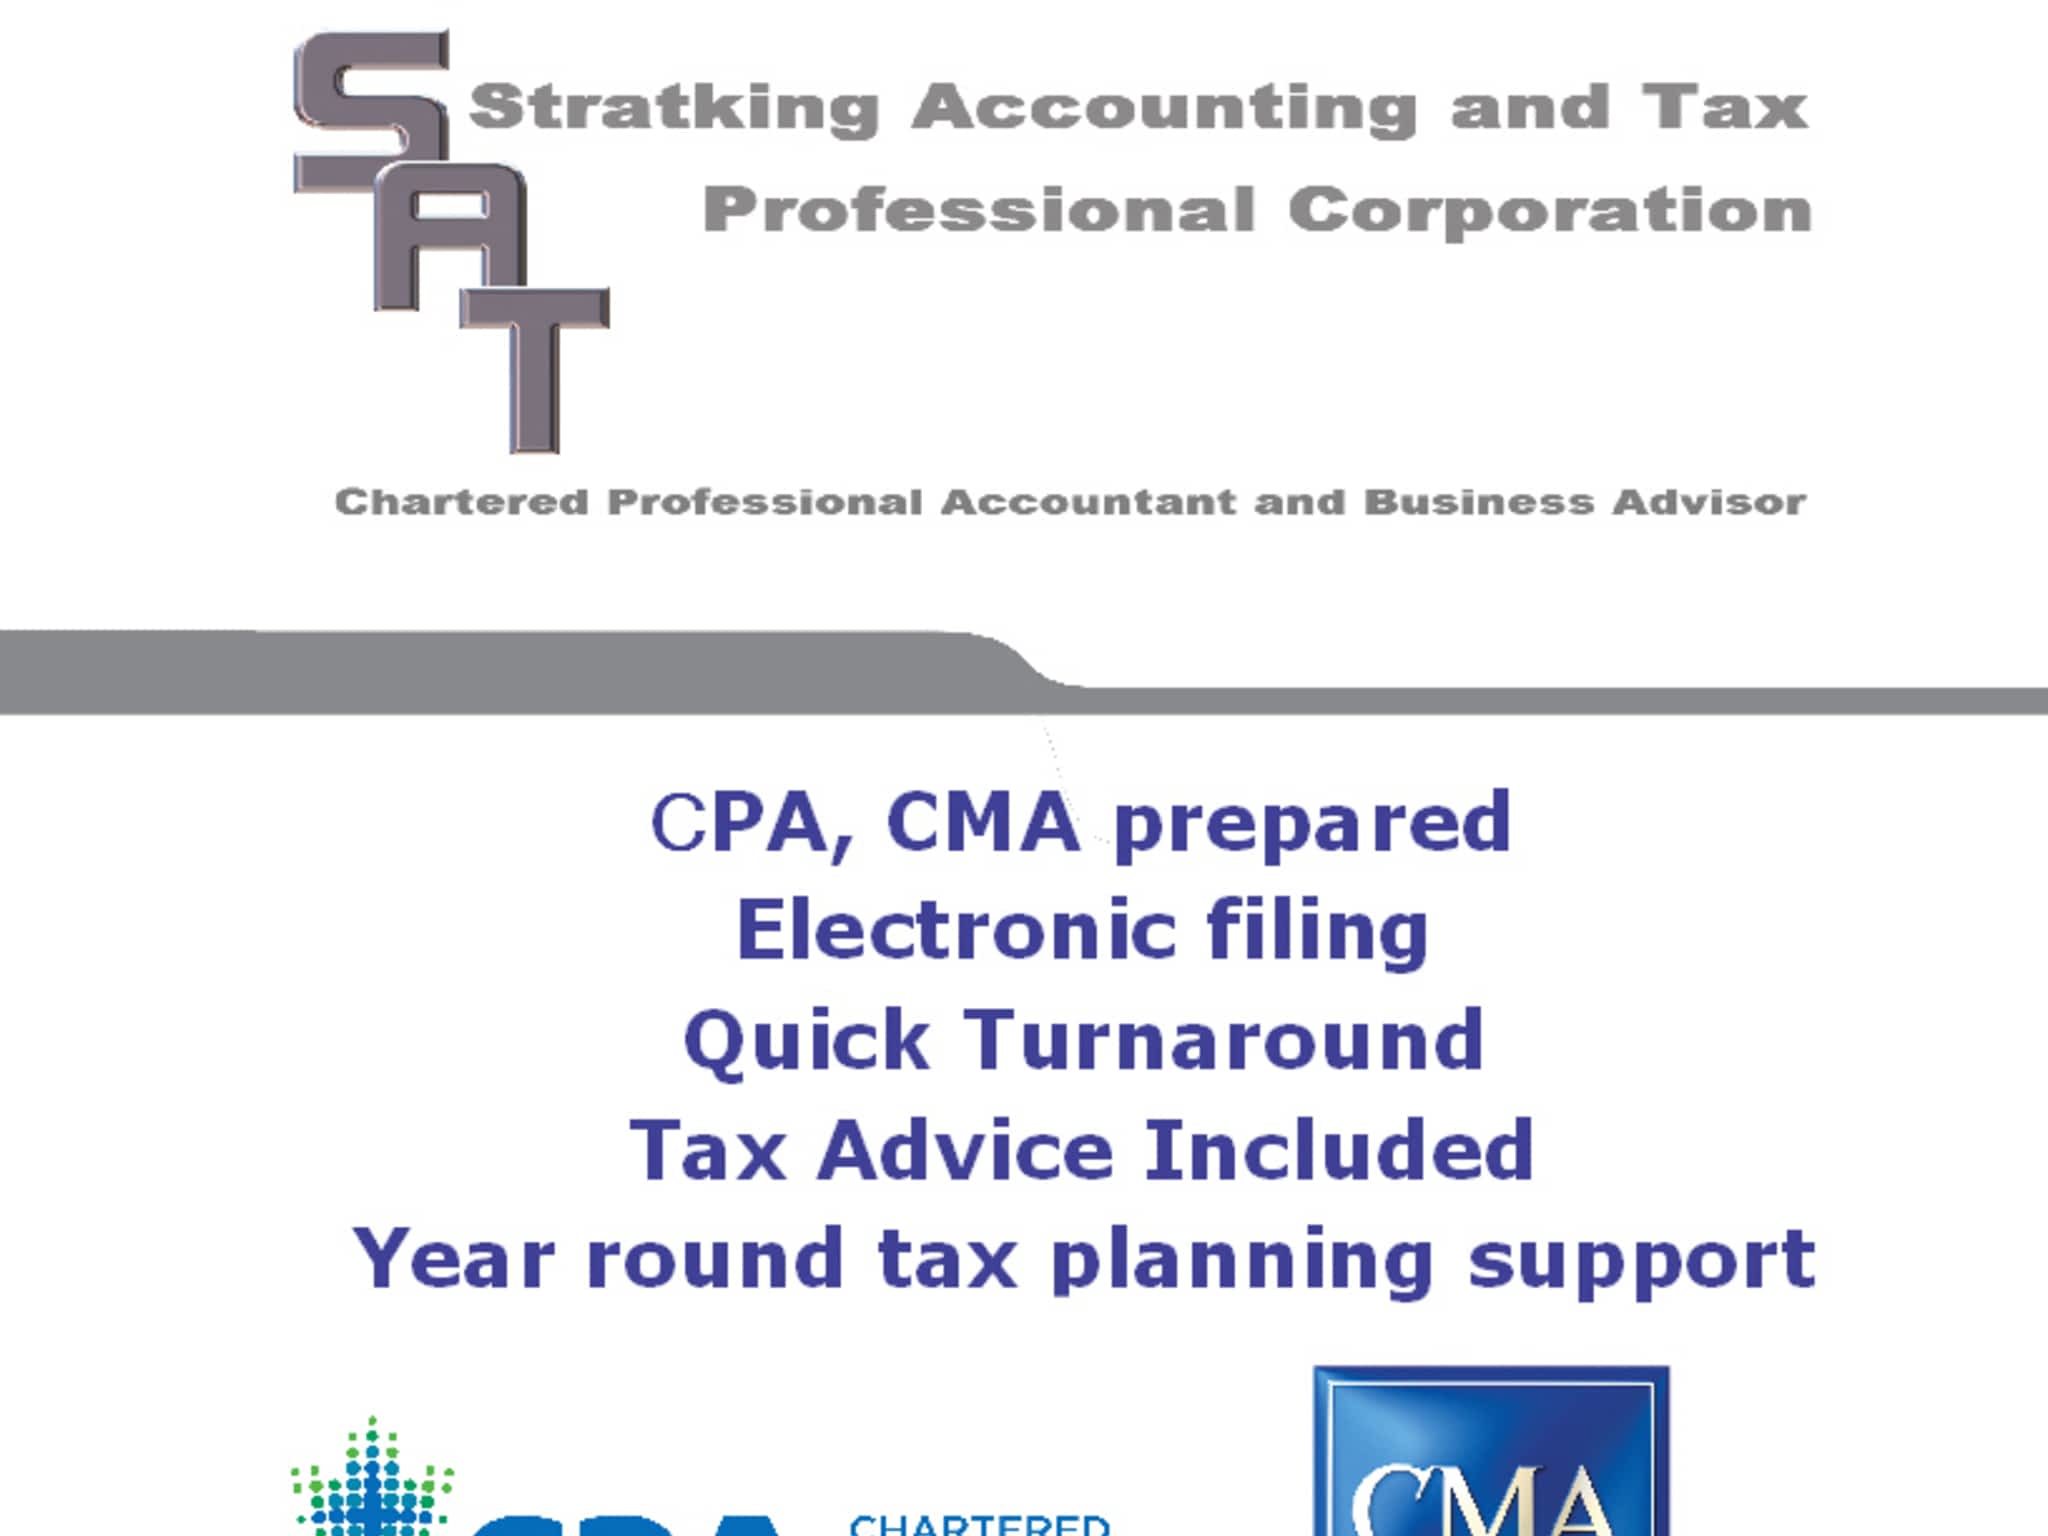 photo Stratking Accounting and Tax Professional Corporation